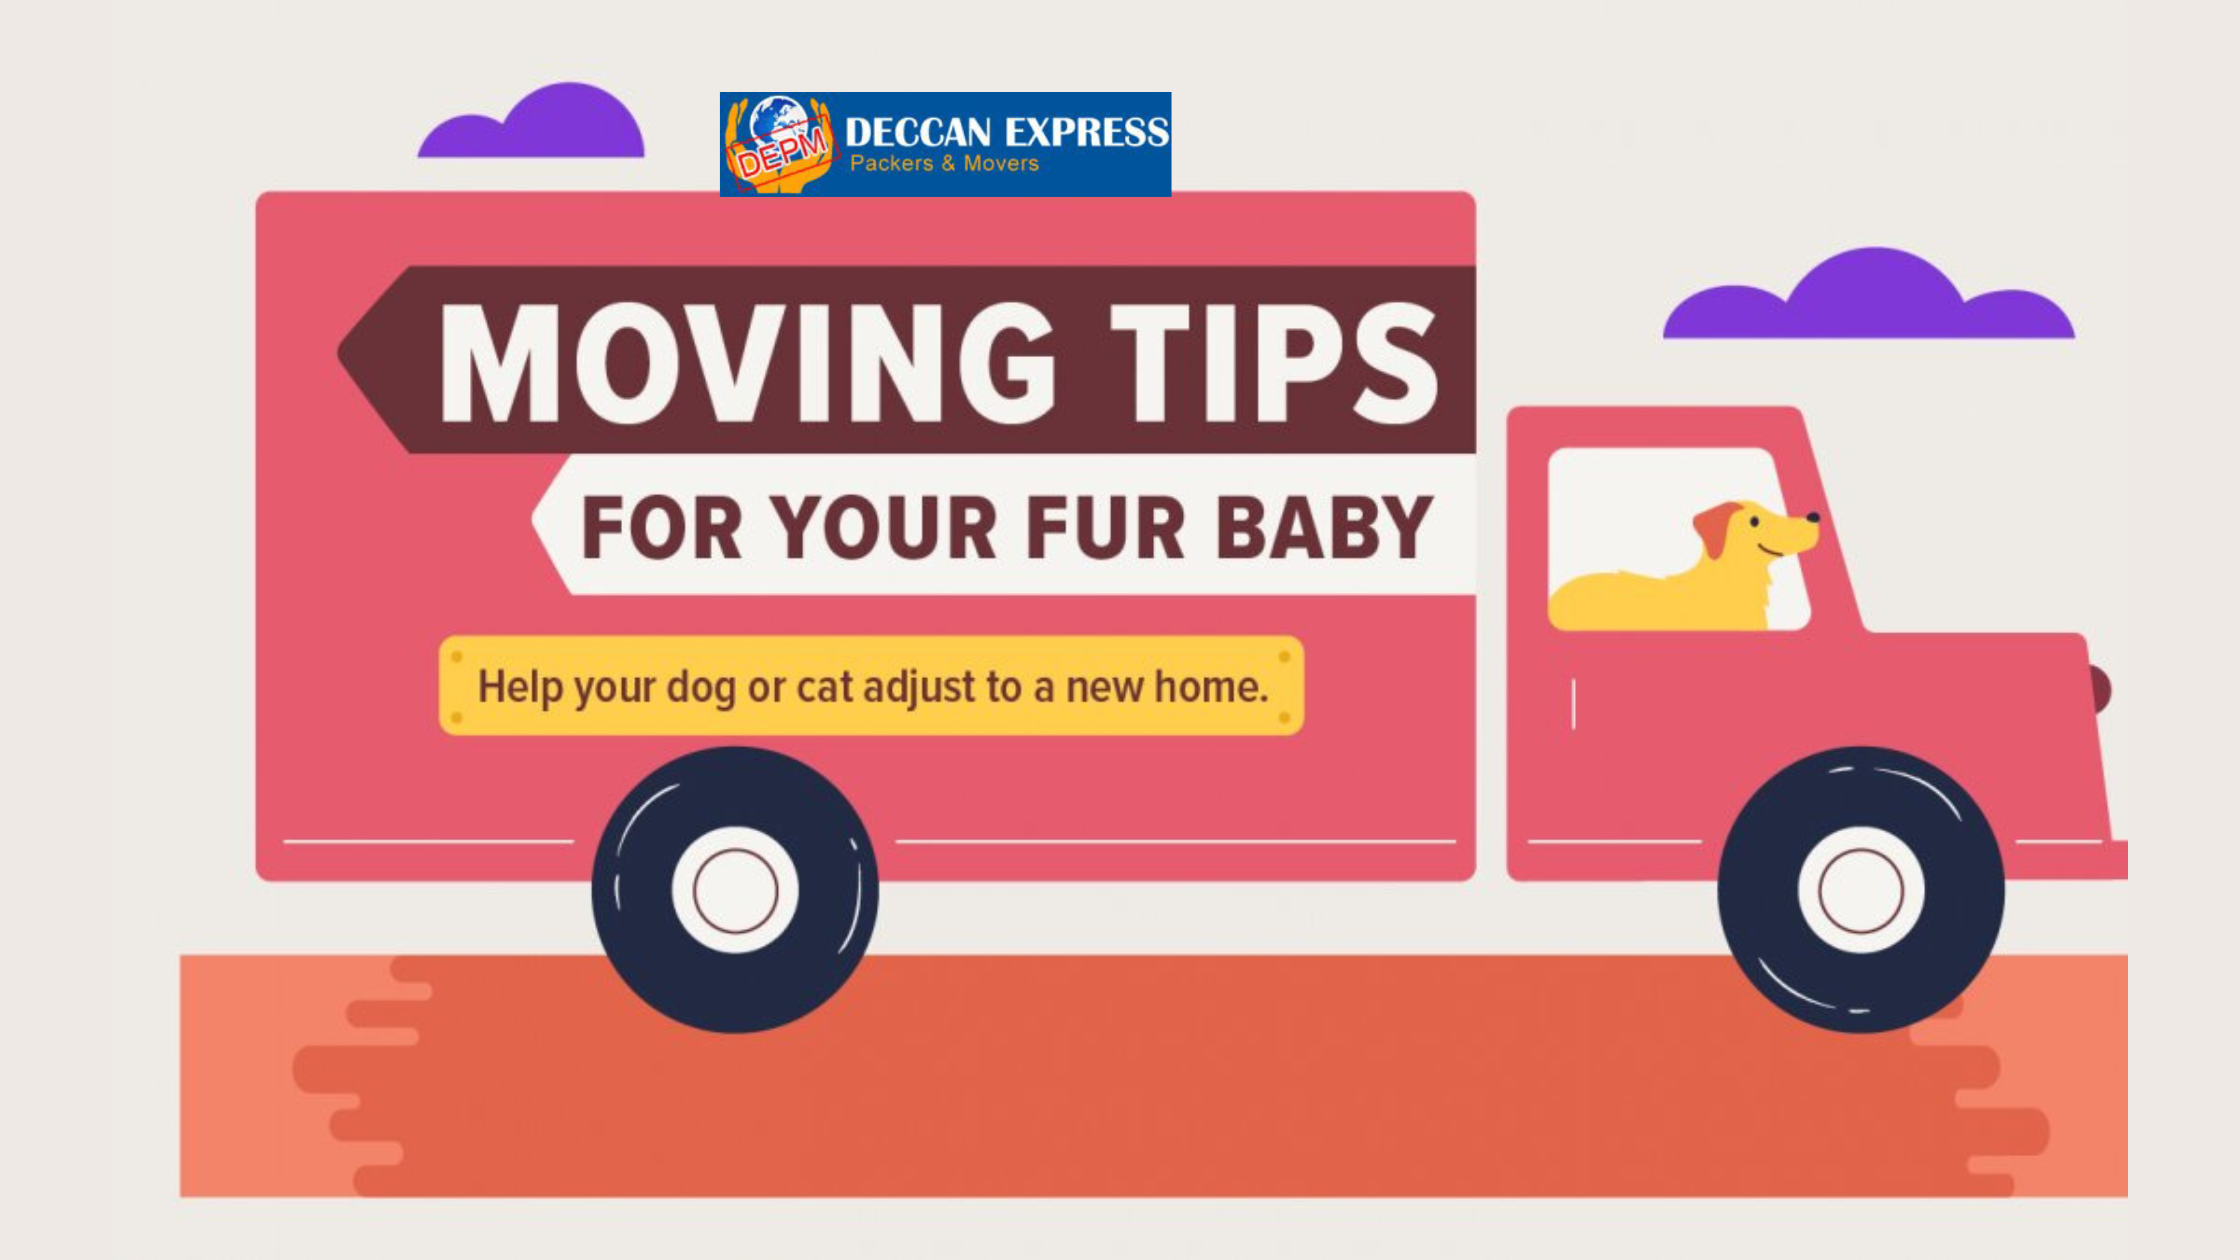 Tips for a Pet-Friendly Move